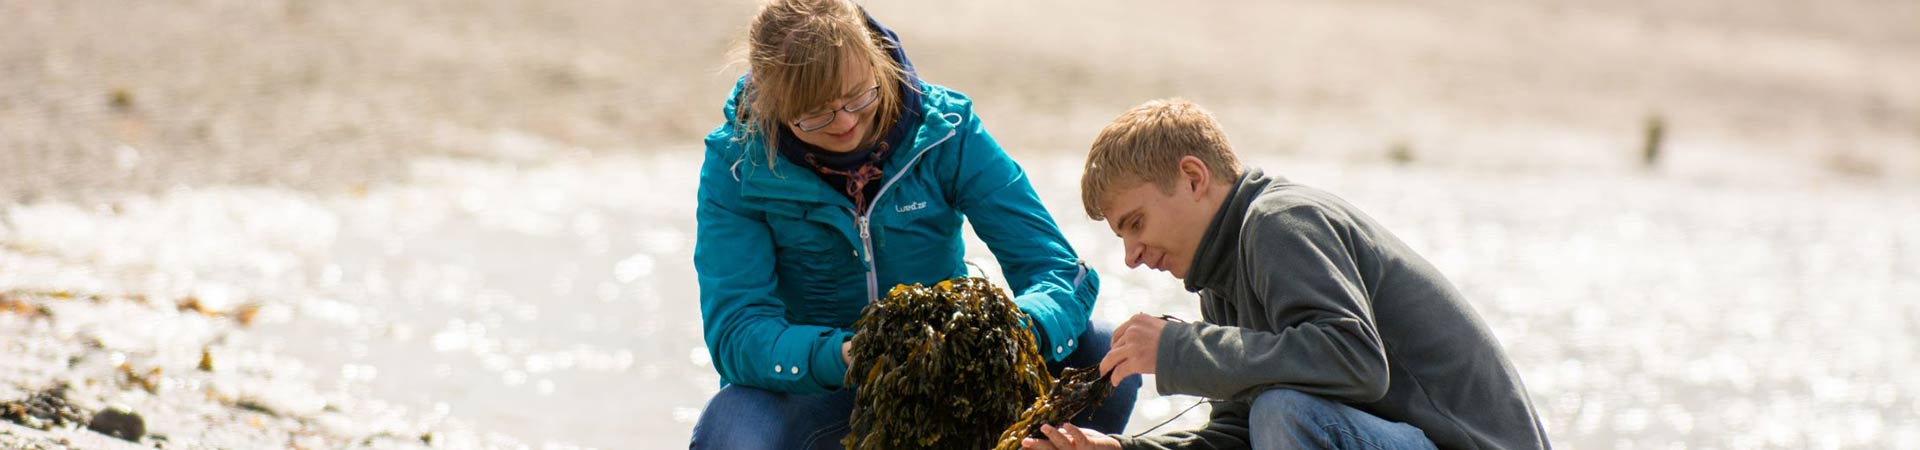 During an open day for prospective students and their families and friends our student ambassadors share their experience of studying marine science at SAMS UHI